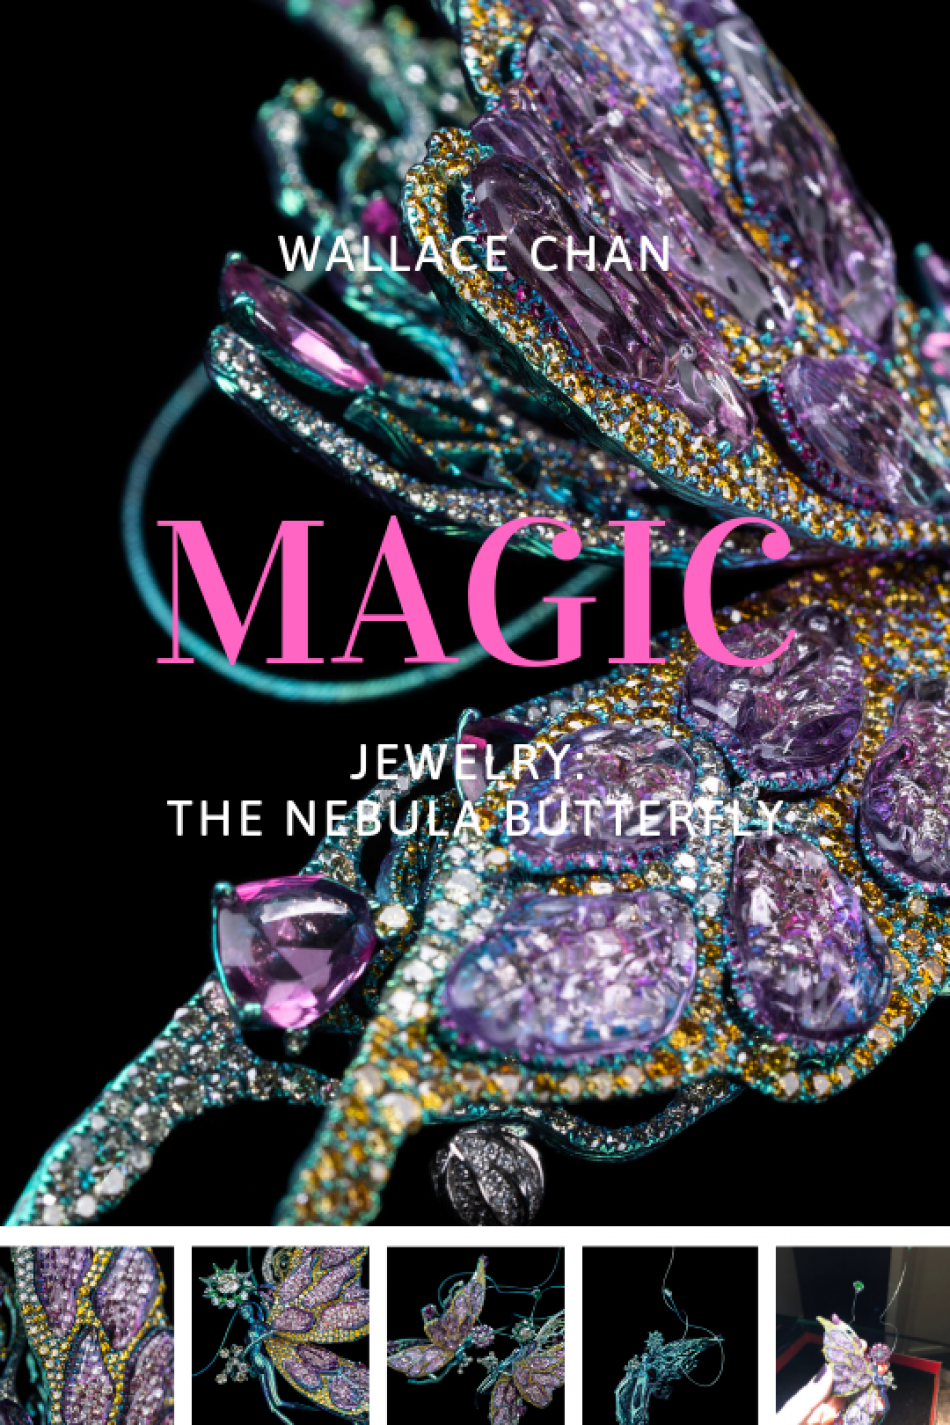 Wallace Chan latest and most magical jewelry